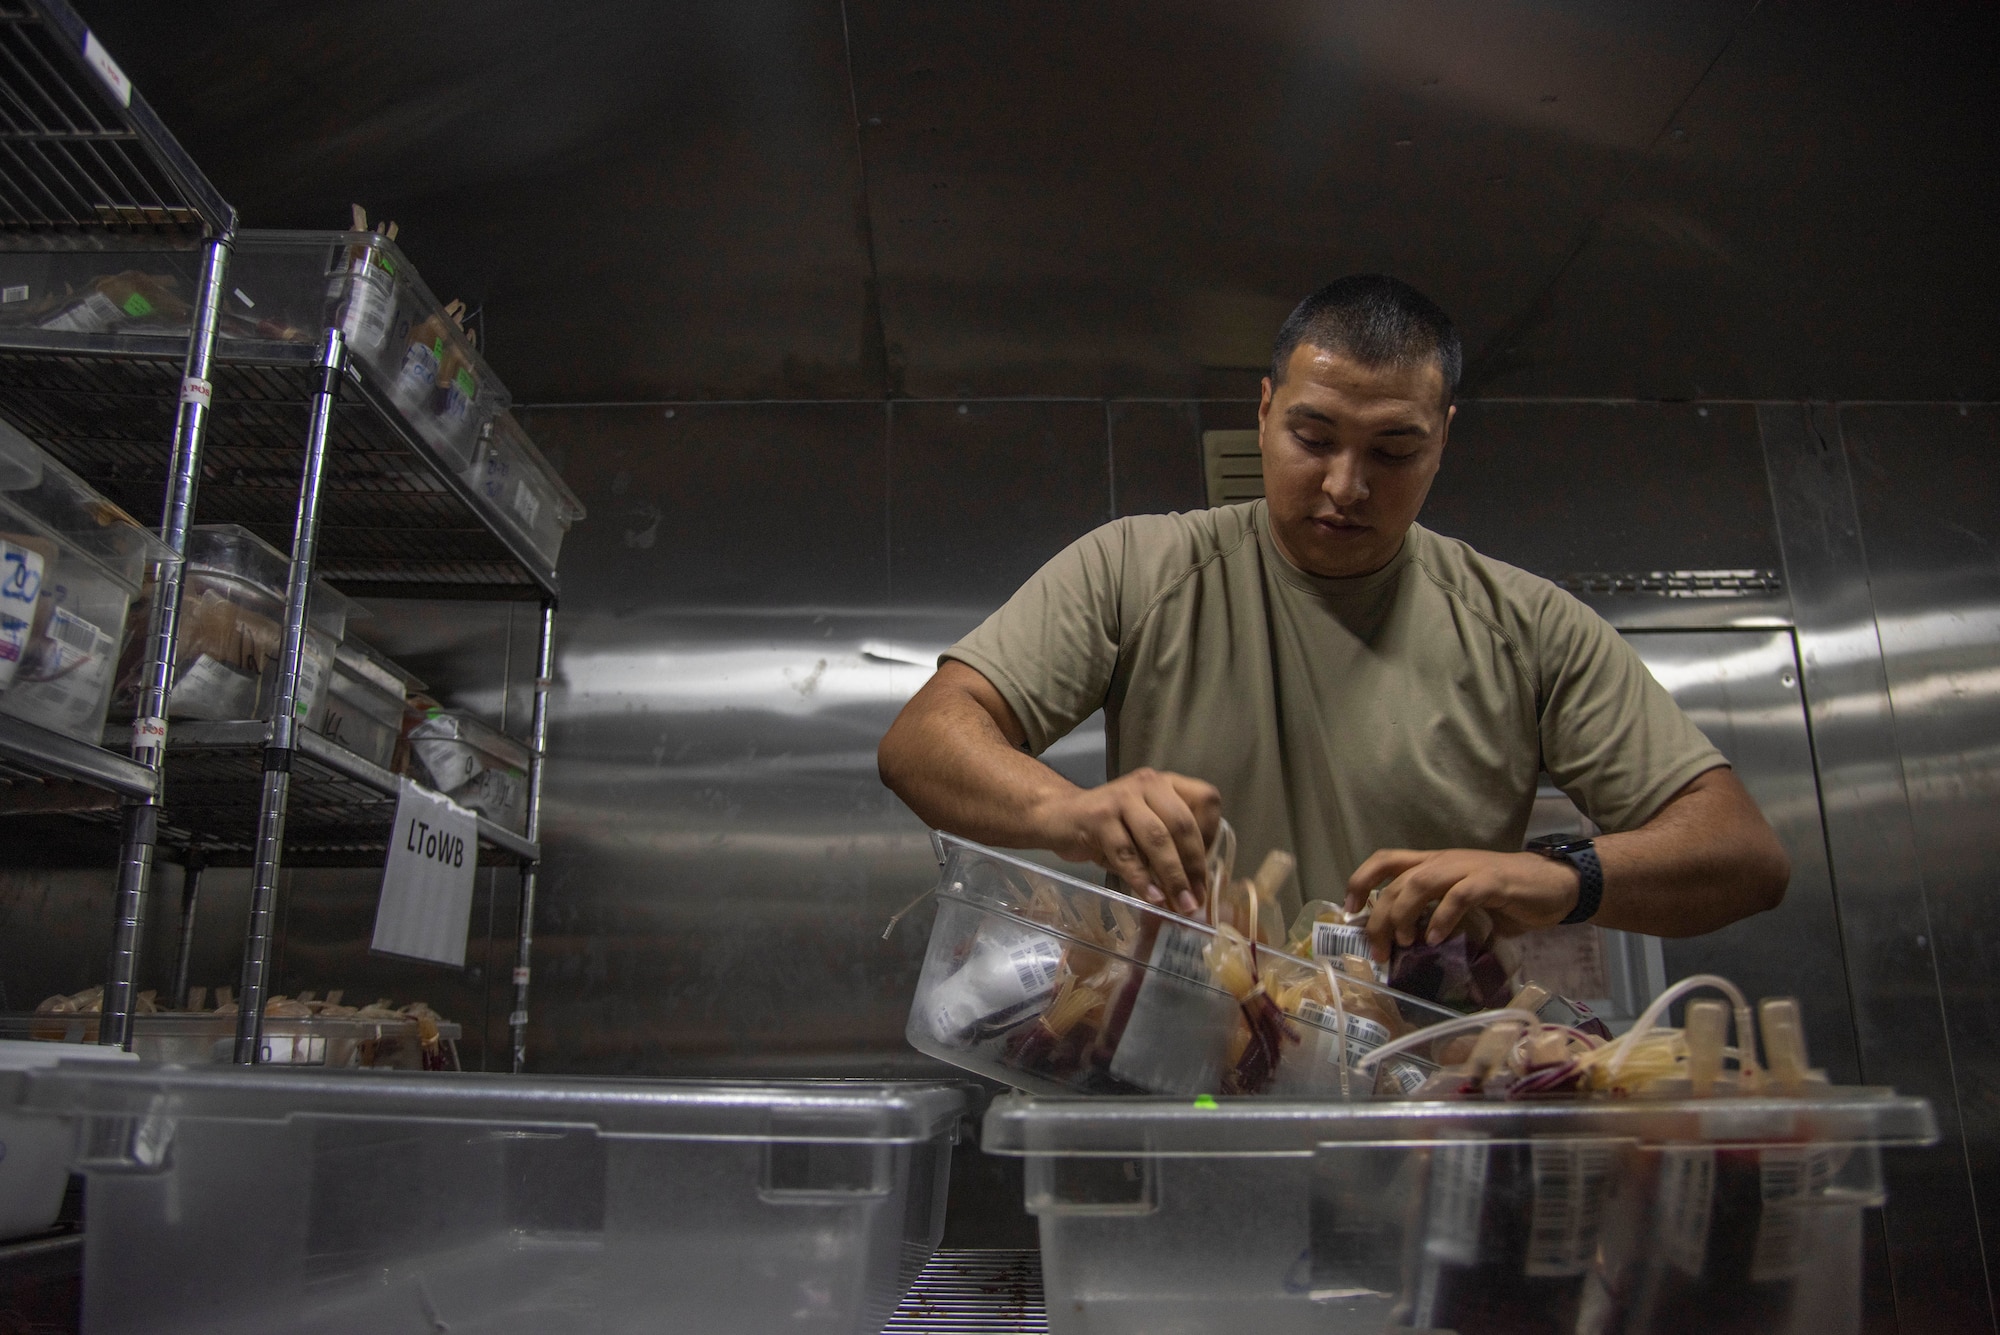 Tech. Sgt. Miguel Davila, 379th Expeditionary Medical Support Squadron medical logistics technician, sorts bags of blood July 1, 2021, at Al Udeid Air Base, Qatar.